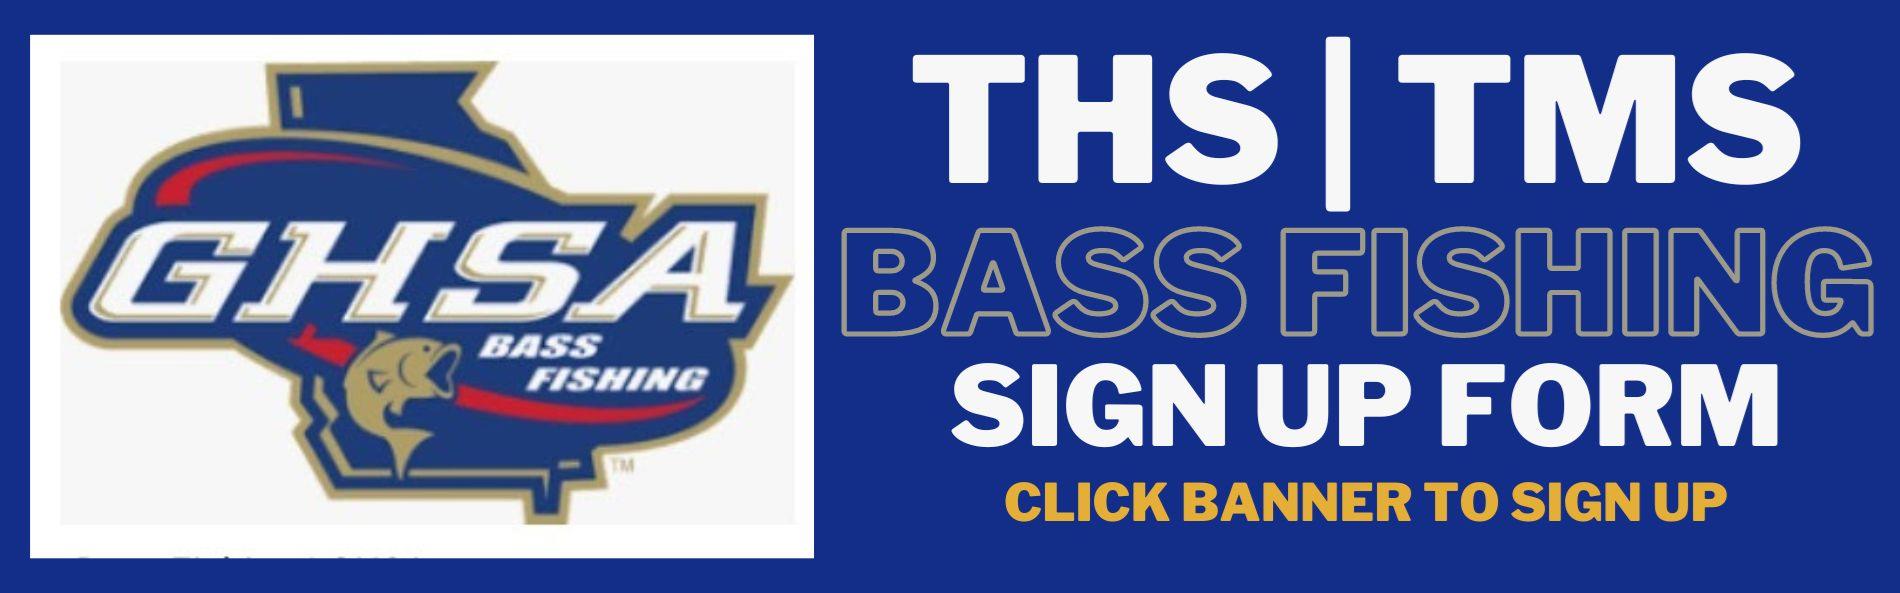 THS BASS FISHING SIGN UP FORM: CLICK LINK TO ACCESS REGISTRATION FORM